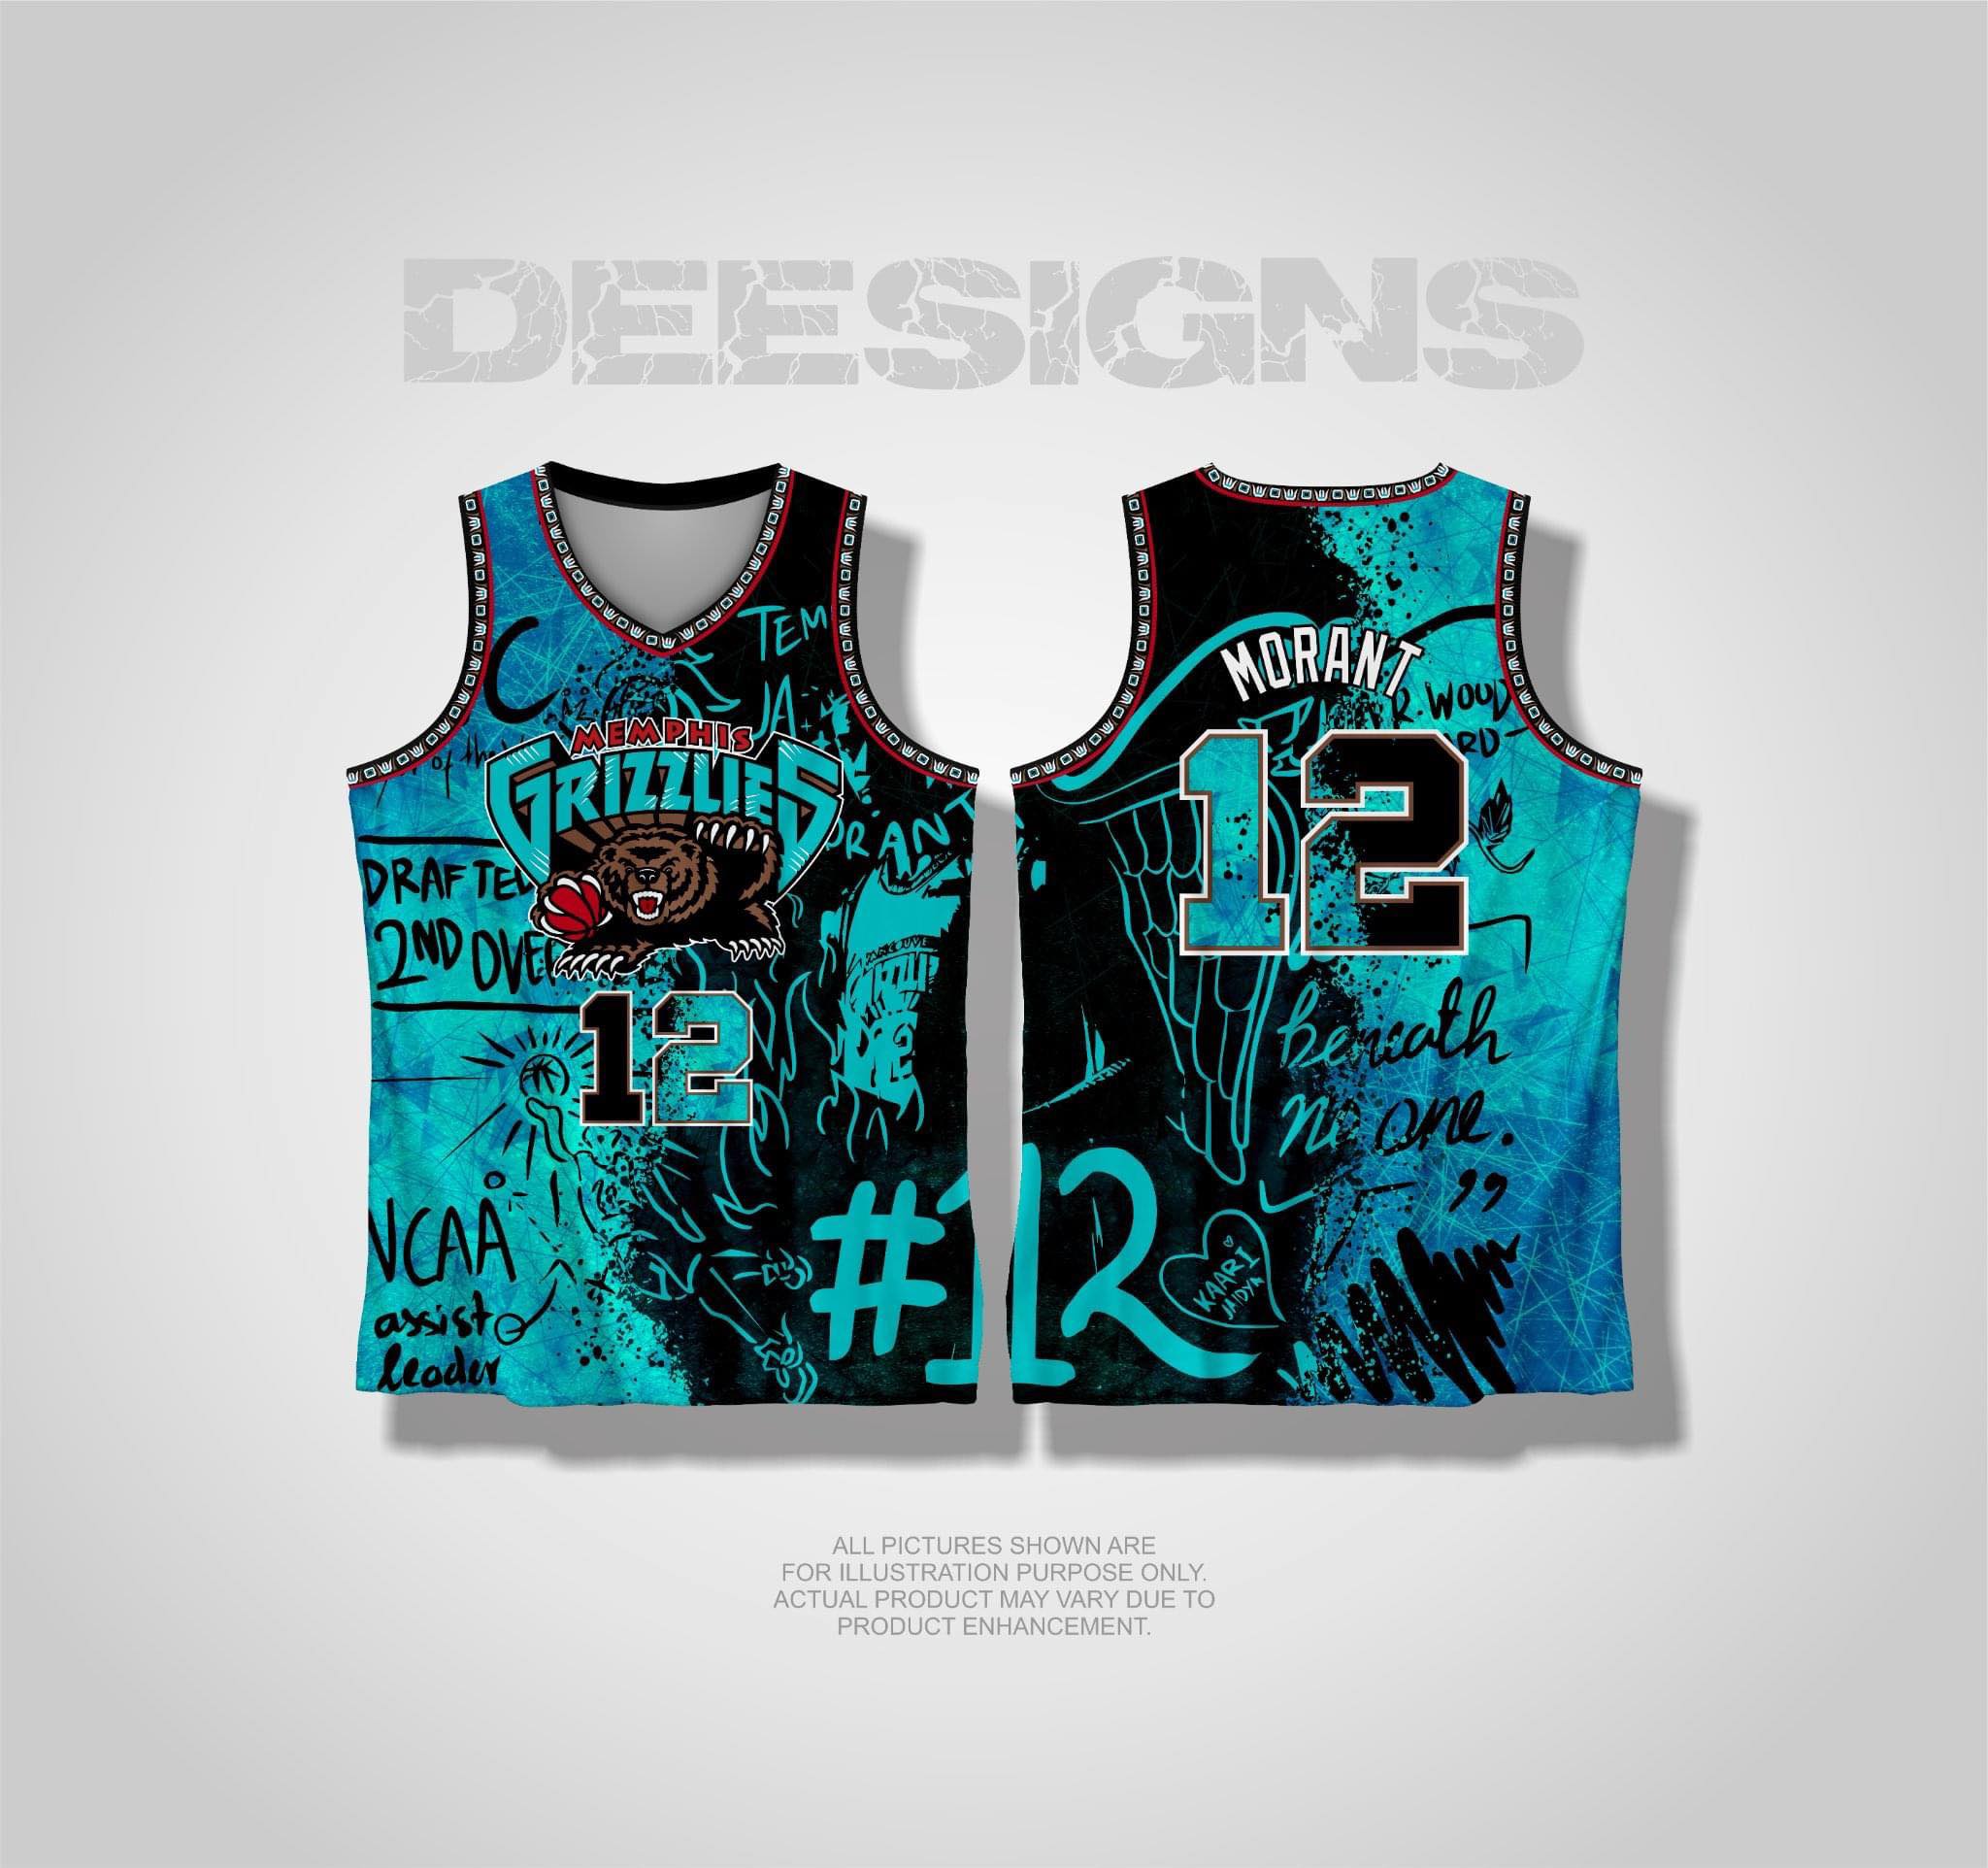 NEW MEMPHIS 07 GRIZZLIES JA MORANT BASKETBALL JERSEY FREE CUSTOMIZE OF NAME  & NUMBER ONLY full sublimation high quality fabrics/ trending jersey